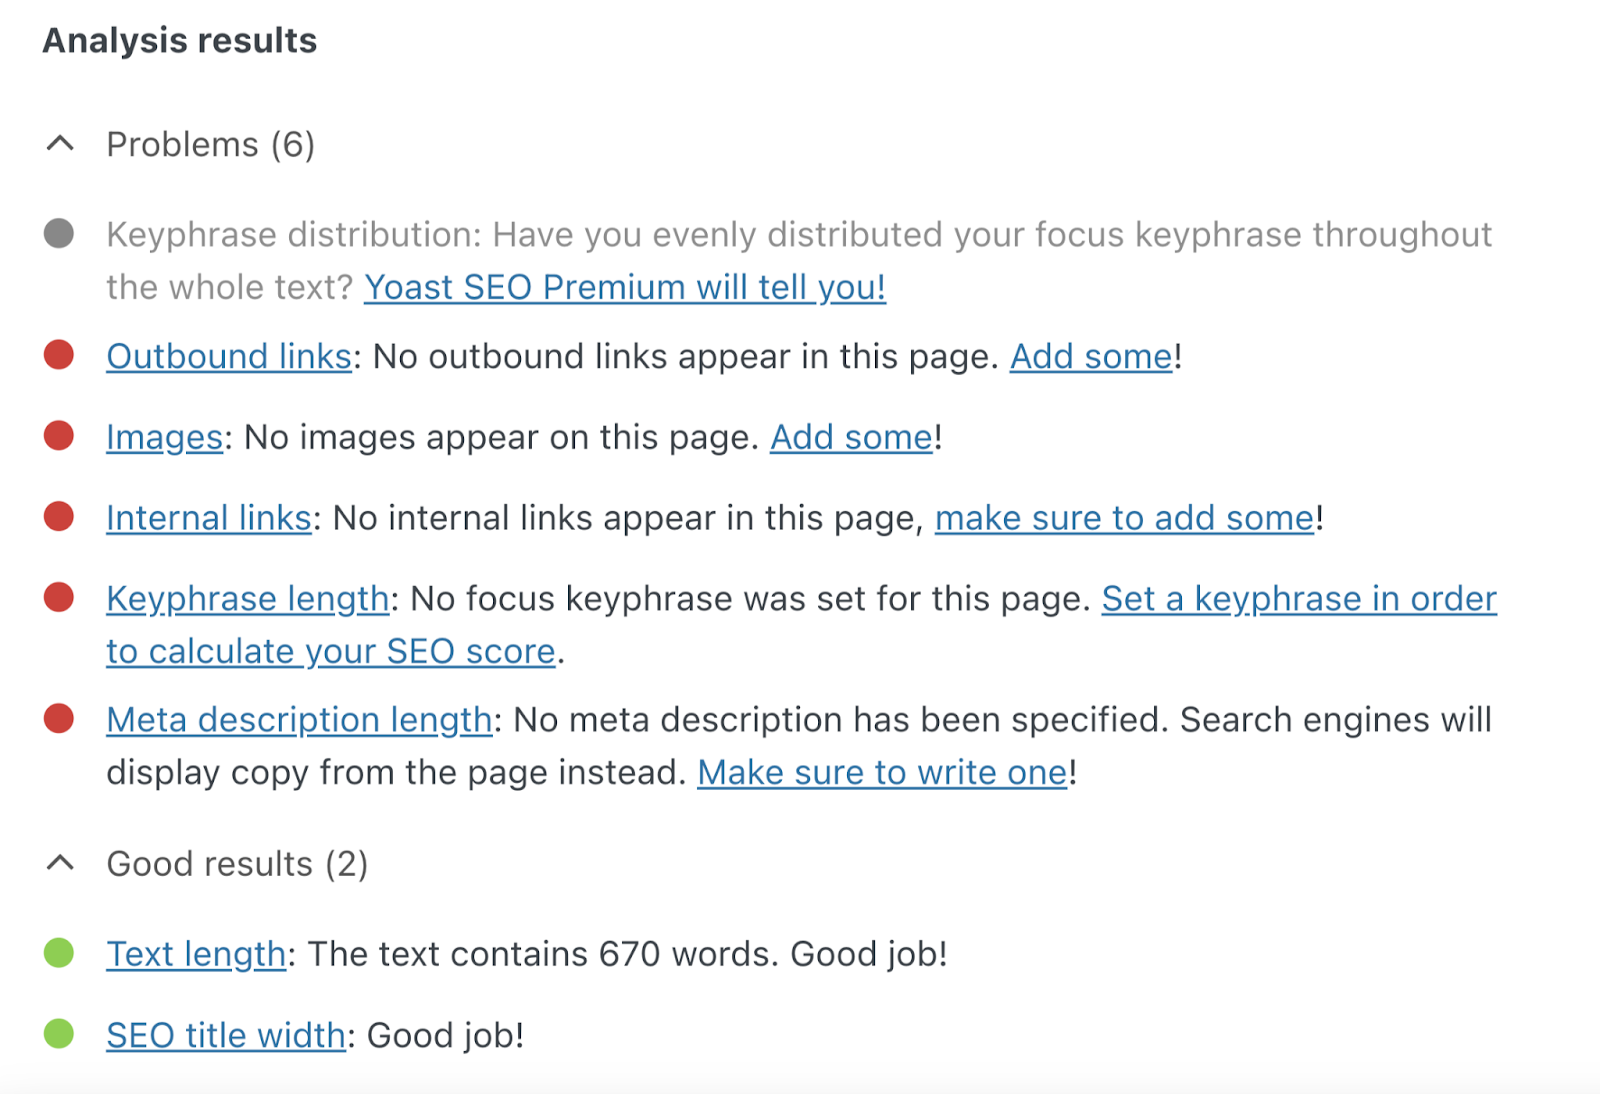 "Analysis results" leafage   successful  Yoast SEO identifies SEO-related issues successful  your content